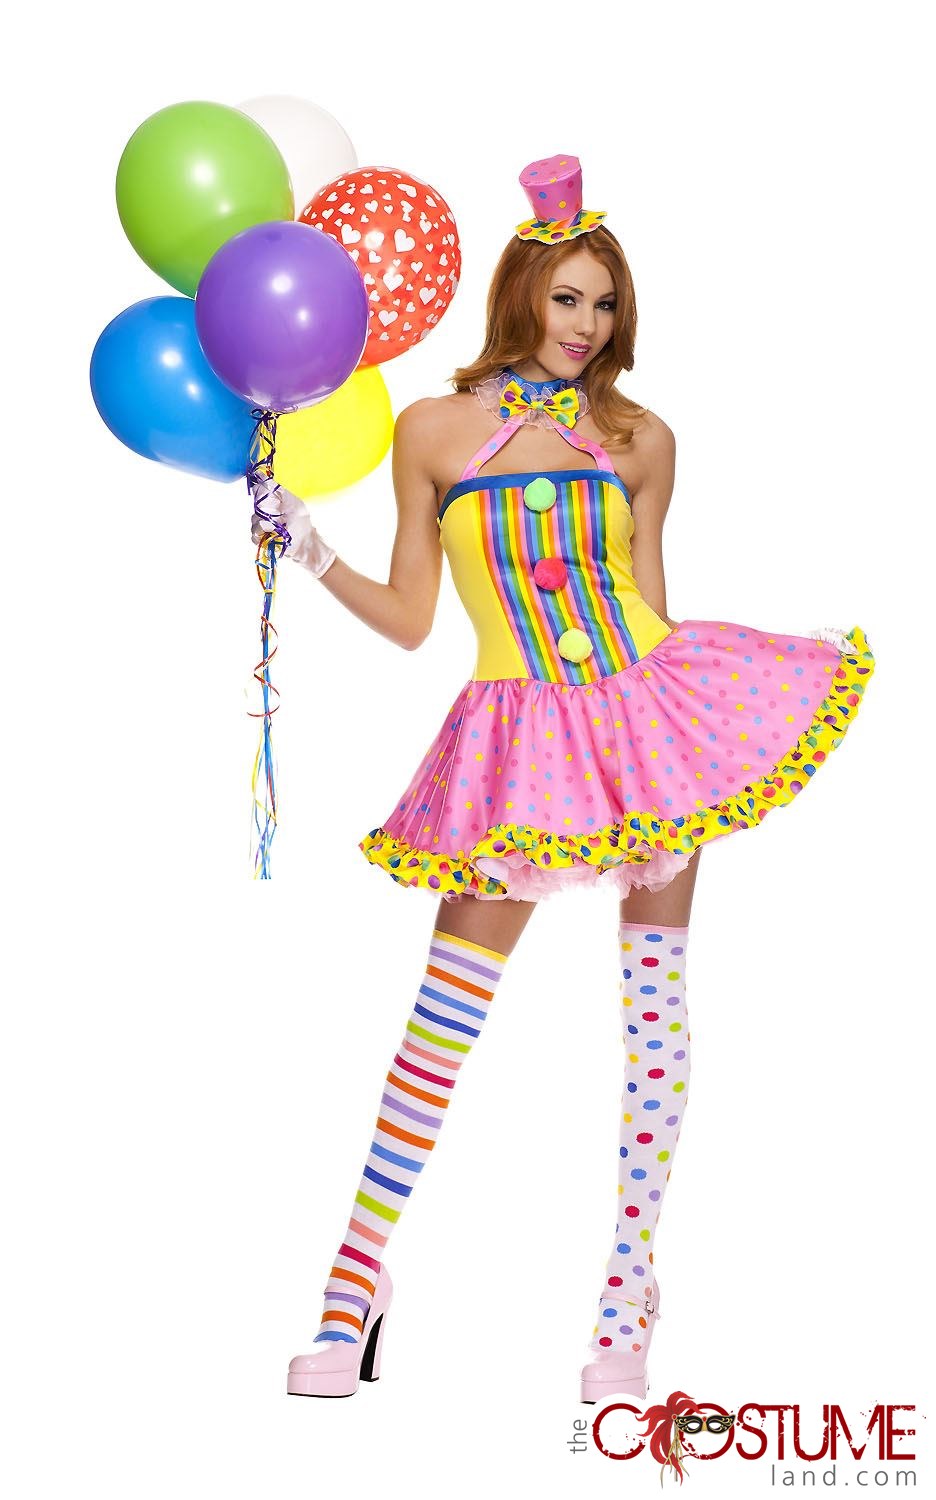 Circus Cutie Women Costume Adult Clown Outfit Ladies Halloween Cosplay Dress Up Ebay 5513